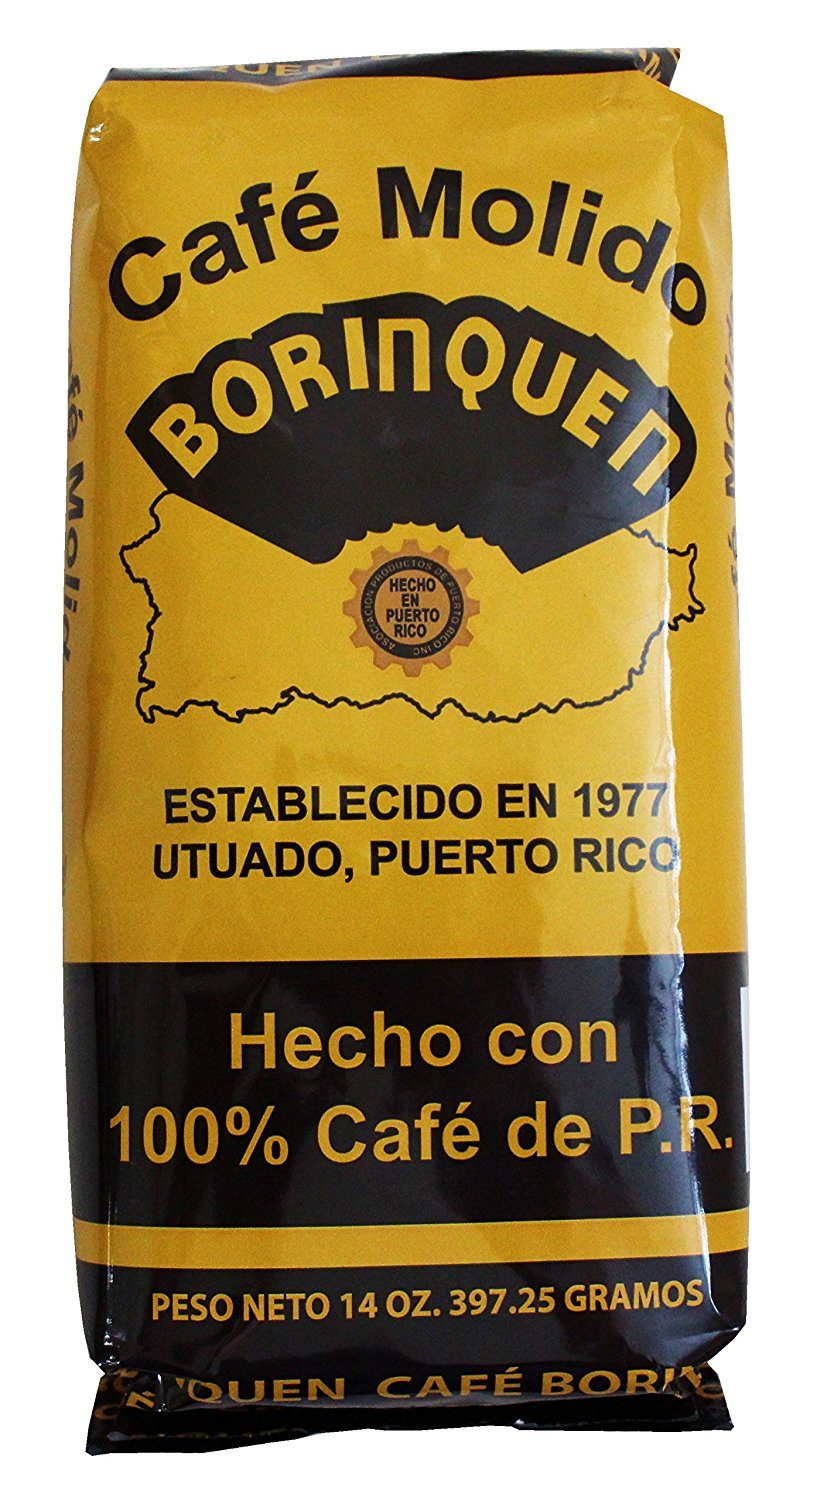 Cafe Molido Borinquen Pure Ground Coffee From Puerto Rico Mountains Bags (2 Pack)